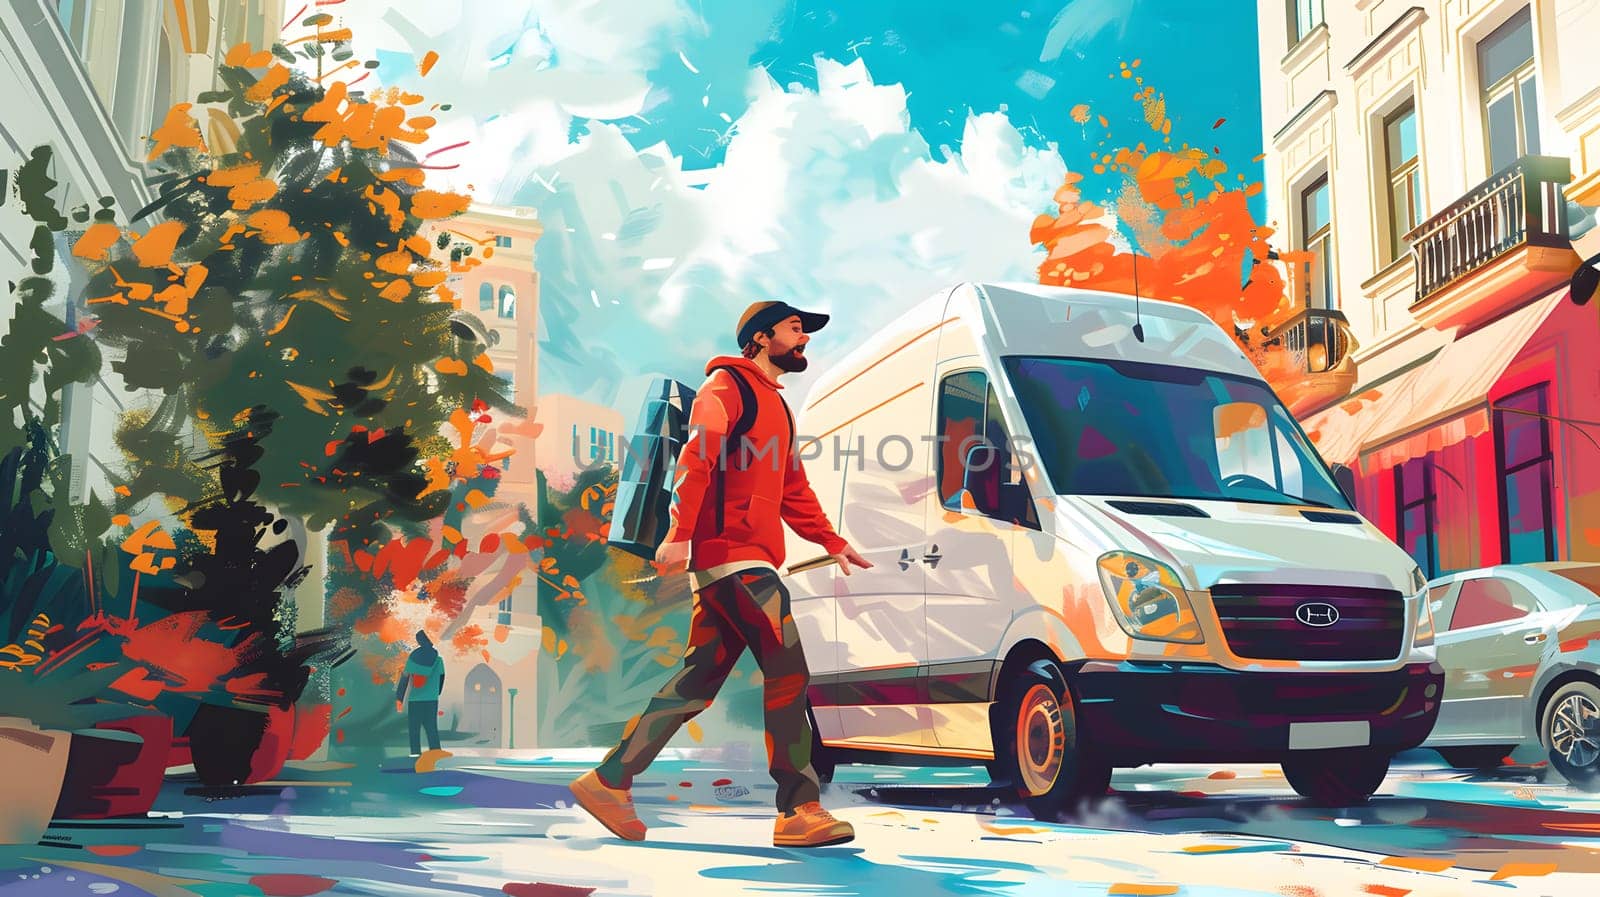 A man walks in front of a white van on a city street by Nadtochiy